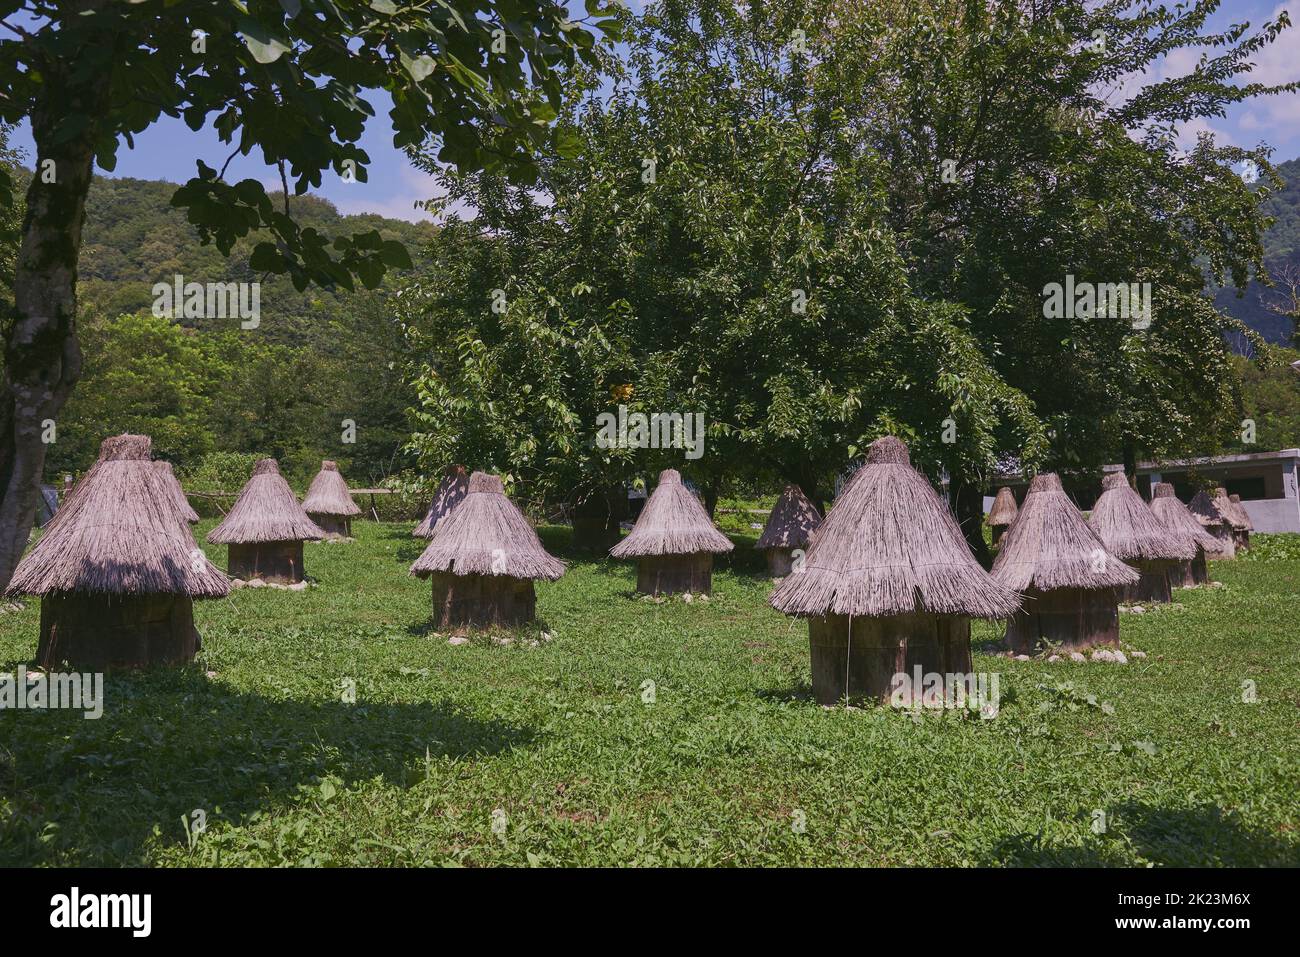 Bee hives with thatched roofs stand in rows among the trees. Stock Photo